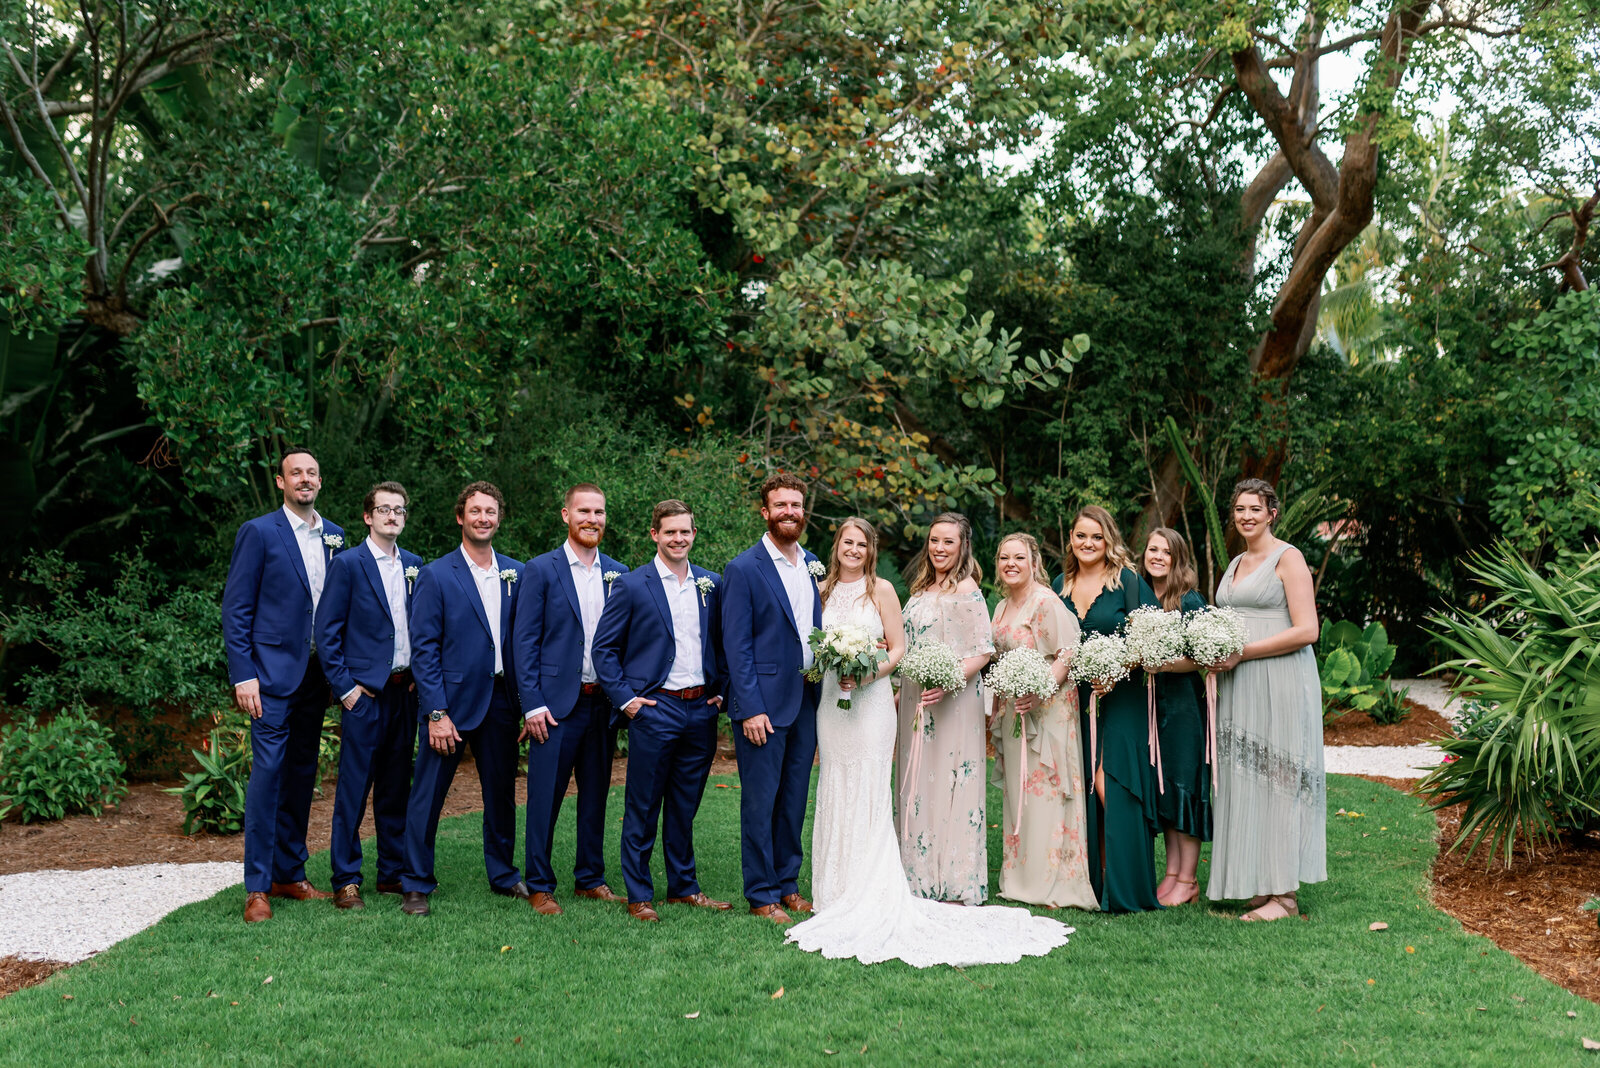 Entire bridal party smiling on a manicured lawn on Captiva Island, FL